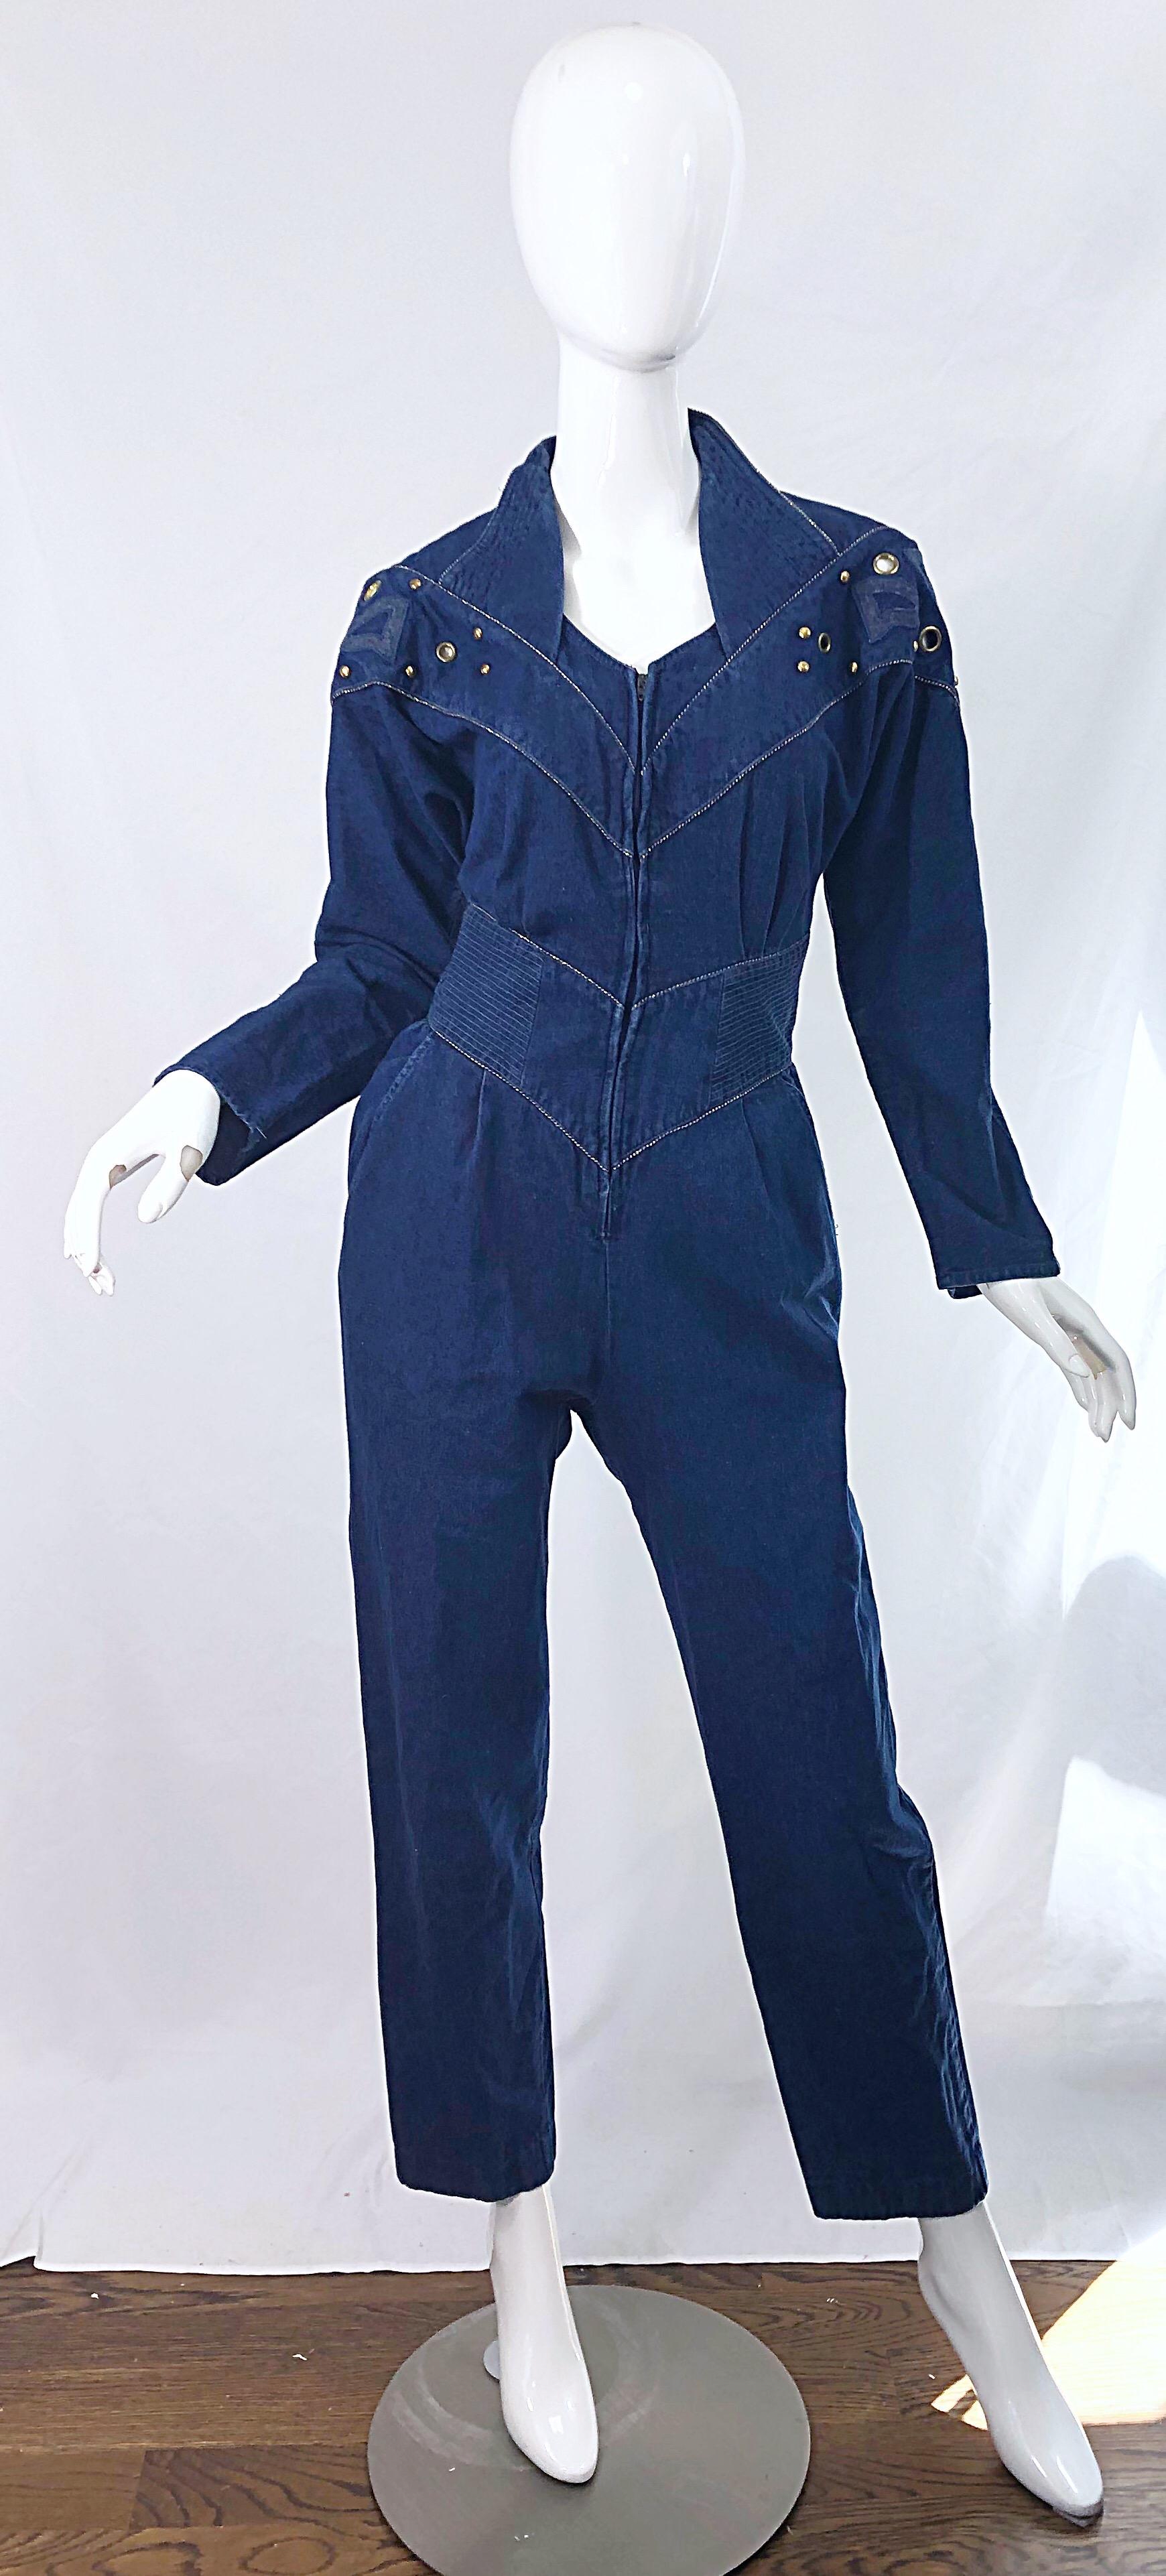 Avant Garde JILLIAN ARTHUR blue jean denim one piece jumpsuit ! Features gold studs and grommets along the front and back dolman sleeve bodice. Hidden zipper up the front. Pockets at each side of the hip. 
Made in USA
Approximately Size Medium /